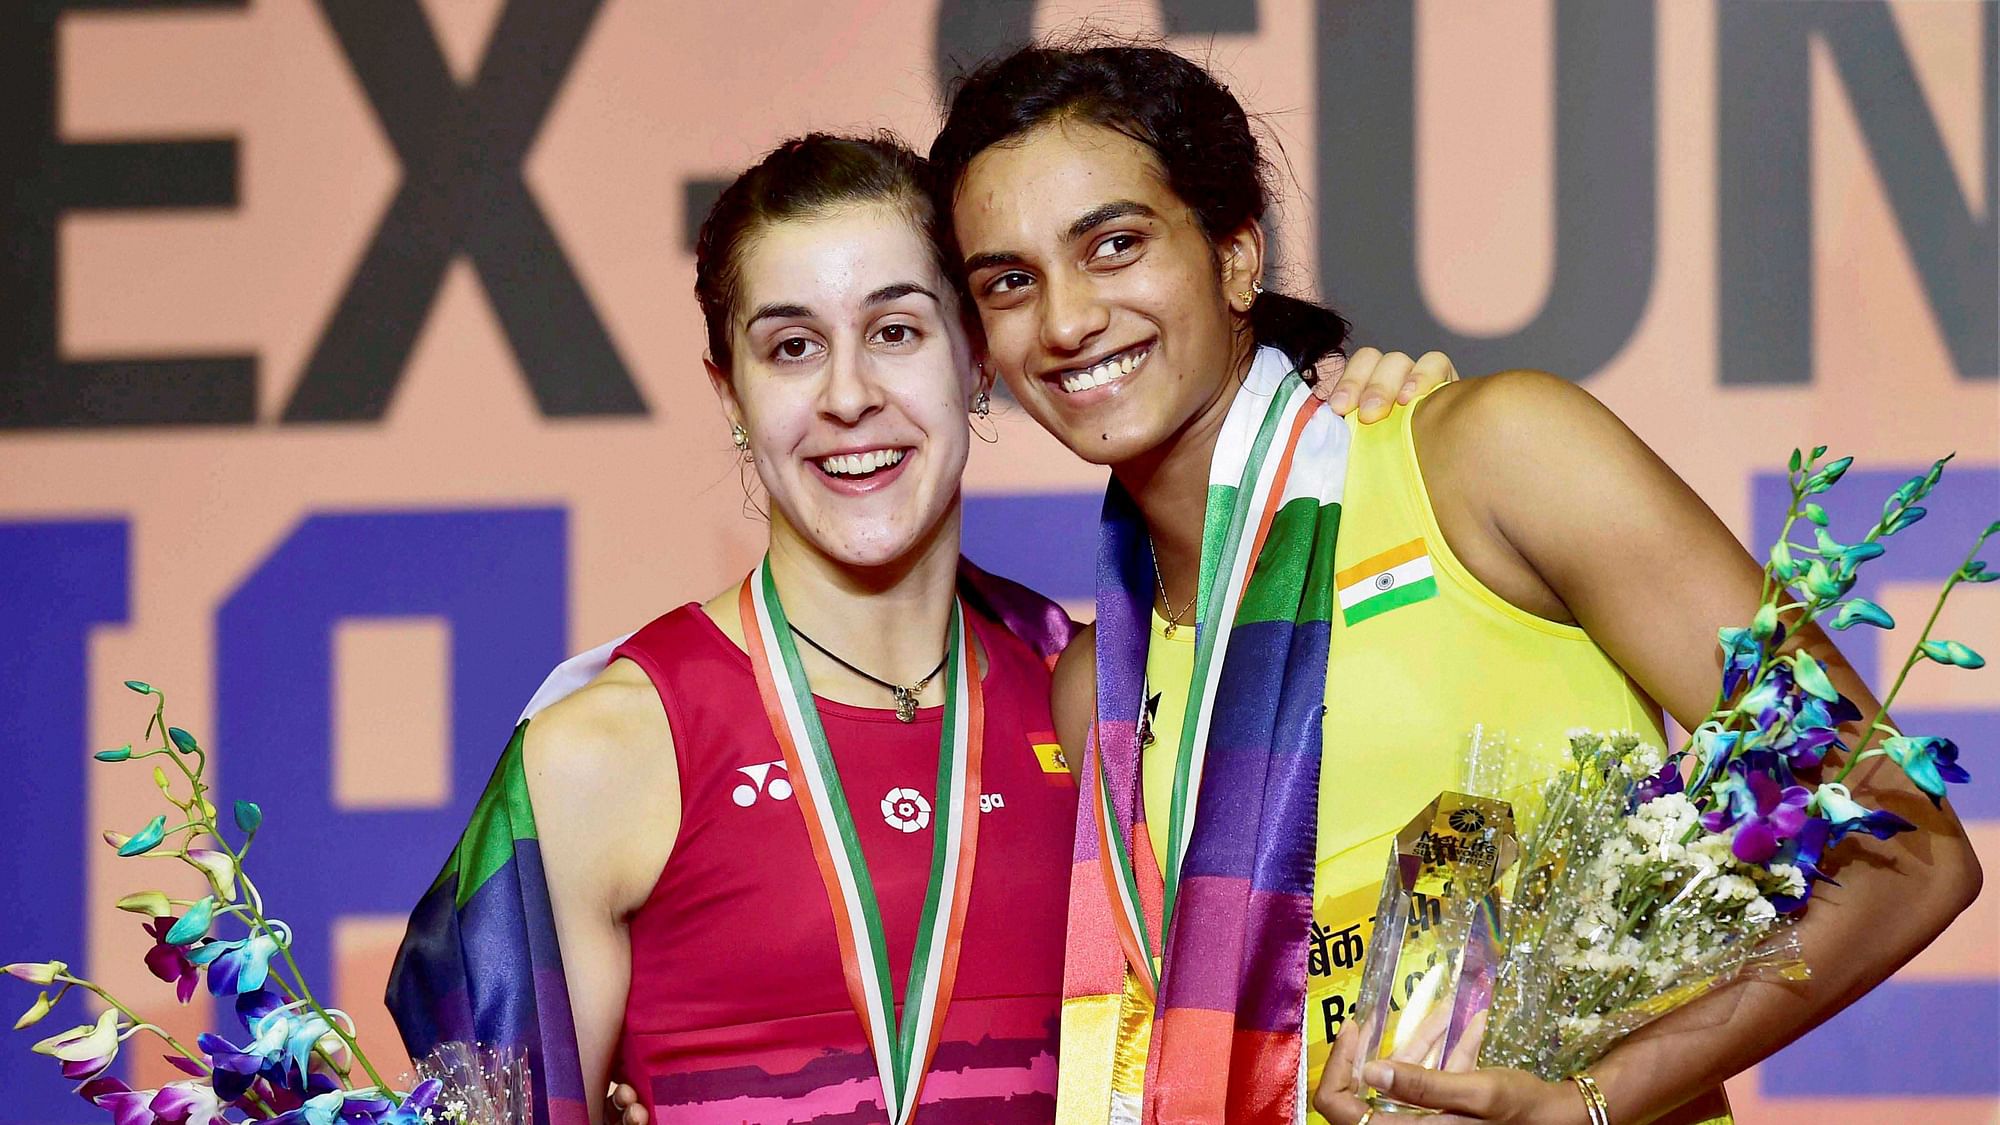 PV Sindhu with Carolina Marin on the podium after the India Open Super Series match. (Photo: PTI)